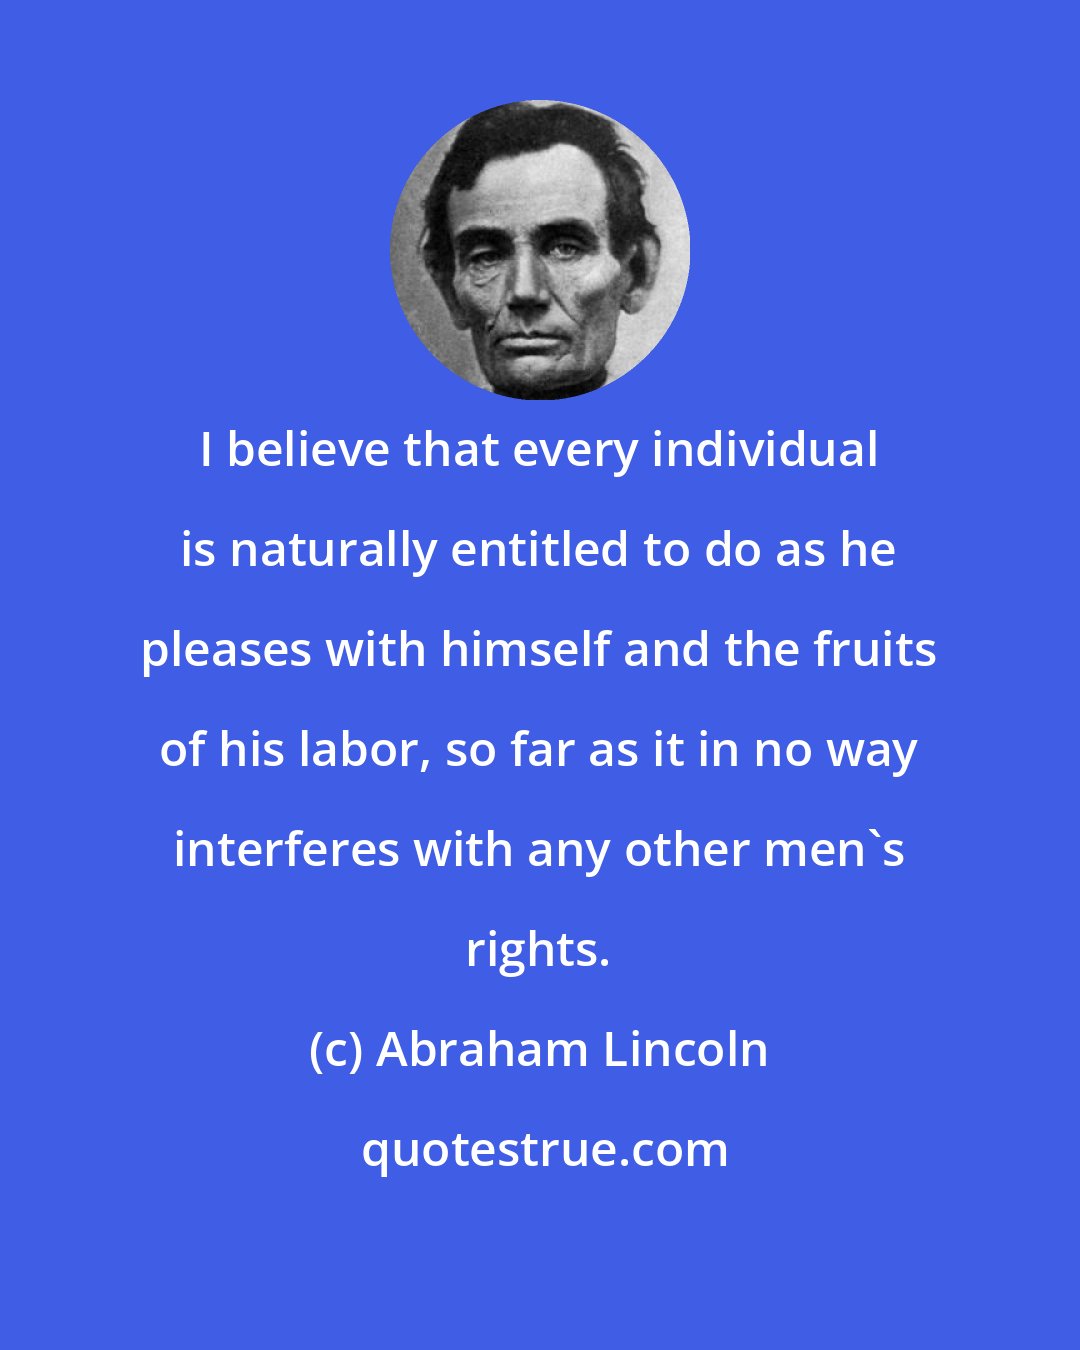 Abraham Lincoln: I believe that every individual is naturally entitled to do as he pleases with himself and the fruits of his labor, so far as it in no way interferes with any other men's rights.